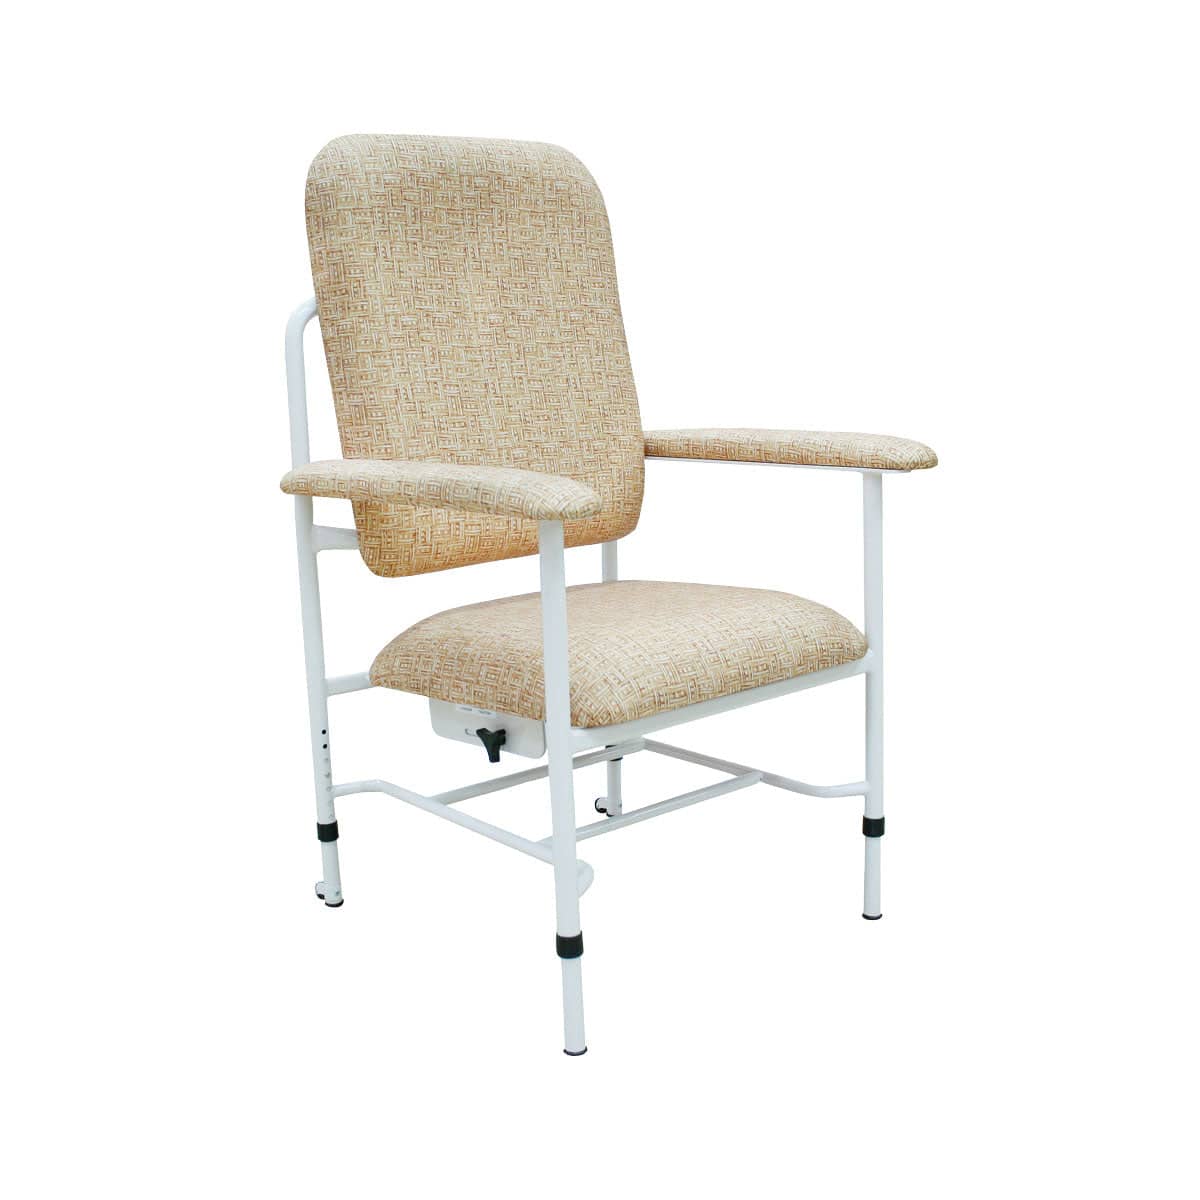 K Care Maxi HiBack Chair Adjustable Height and Seat Depth